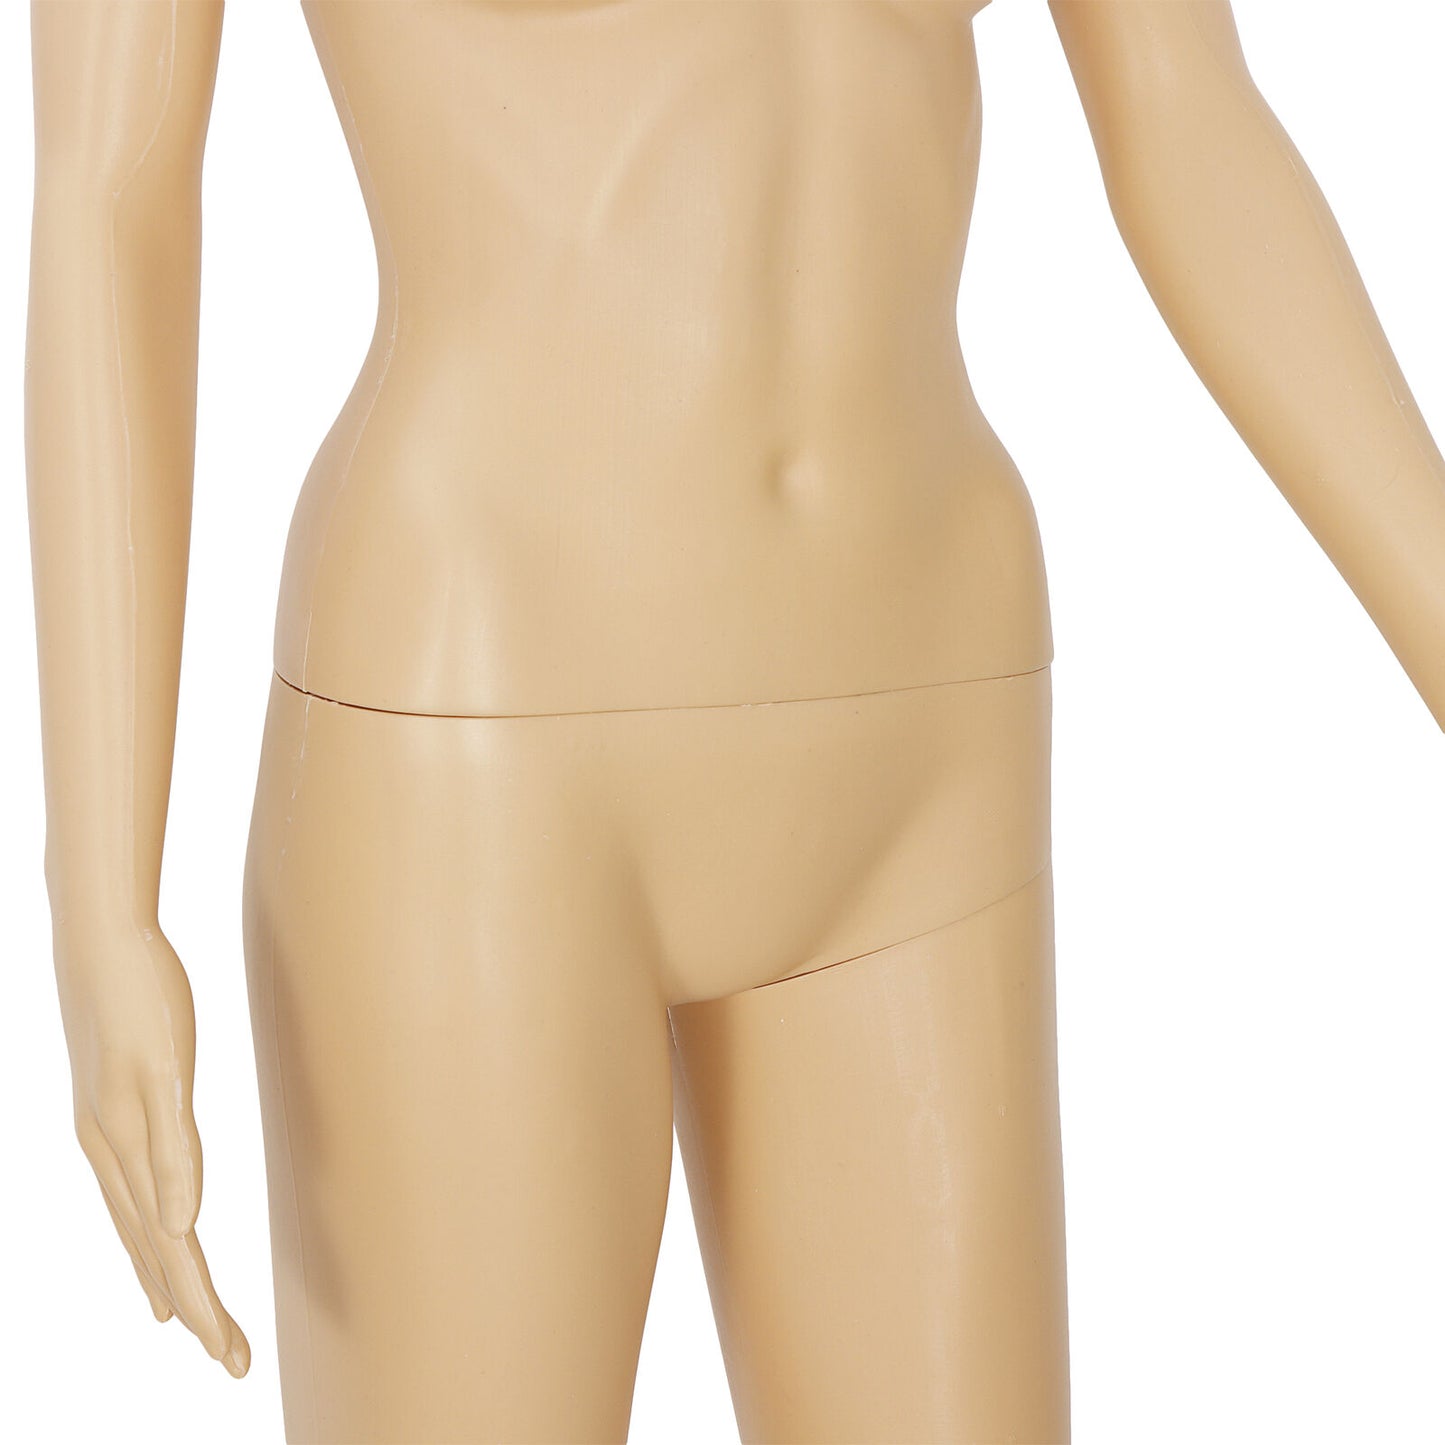 PP Female Mannequin Realistic Display Head Turns Dress Body Form Show Model